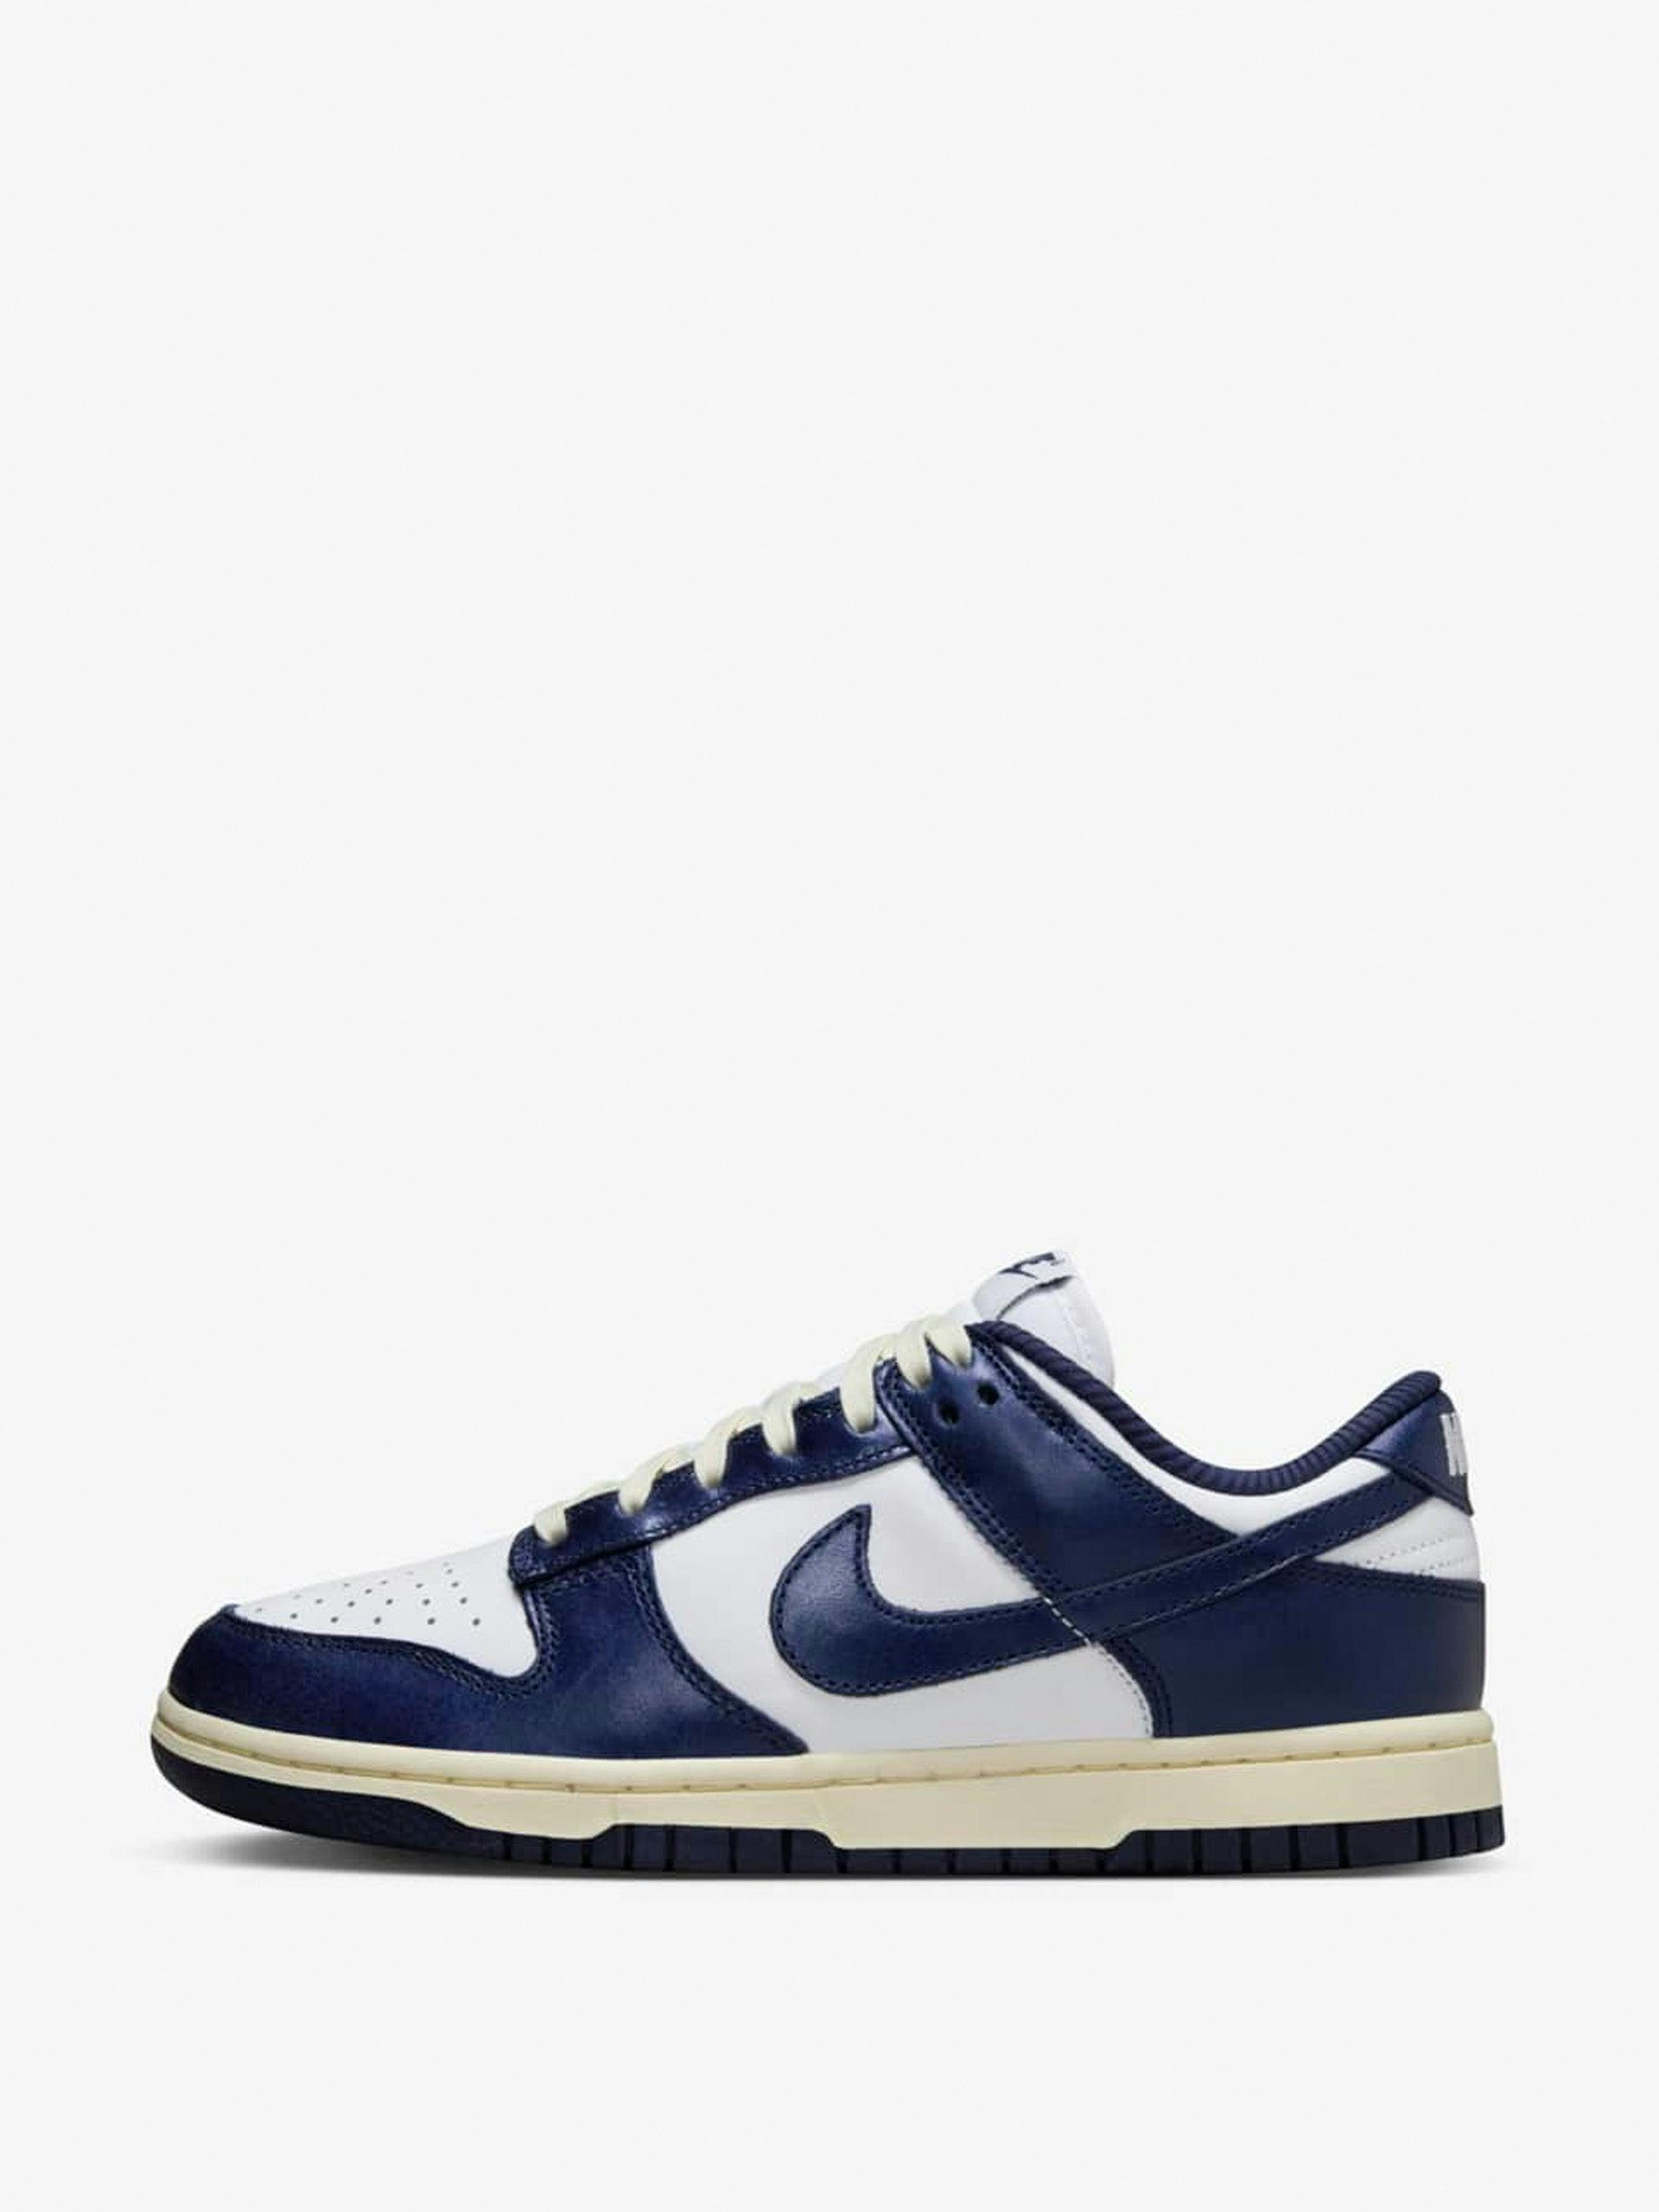 Dunk Low sneakers in Midnight Navy and White